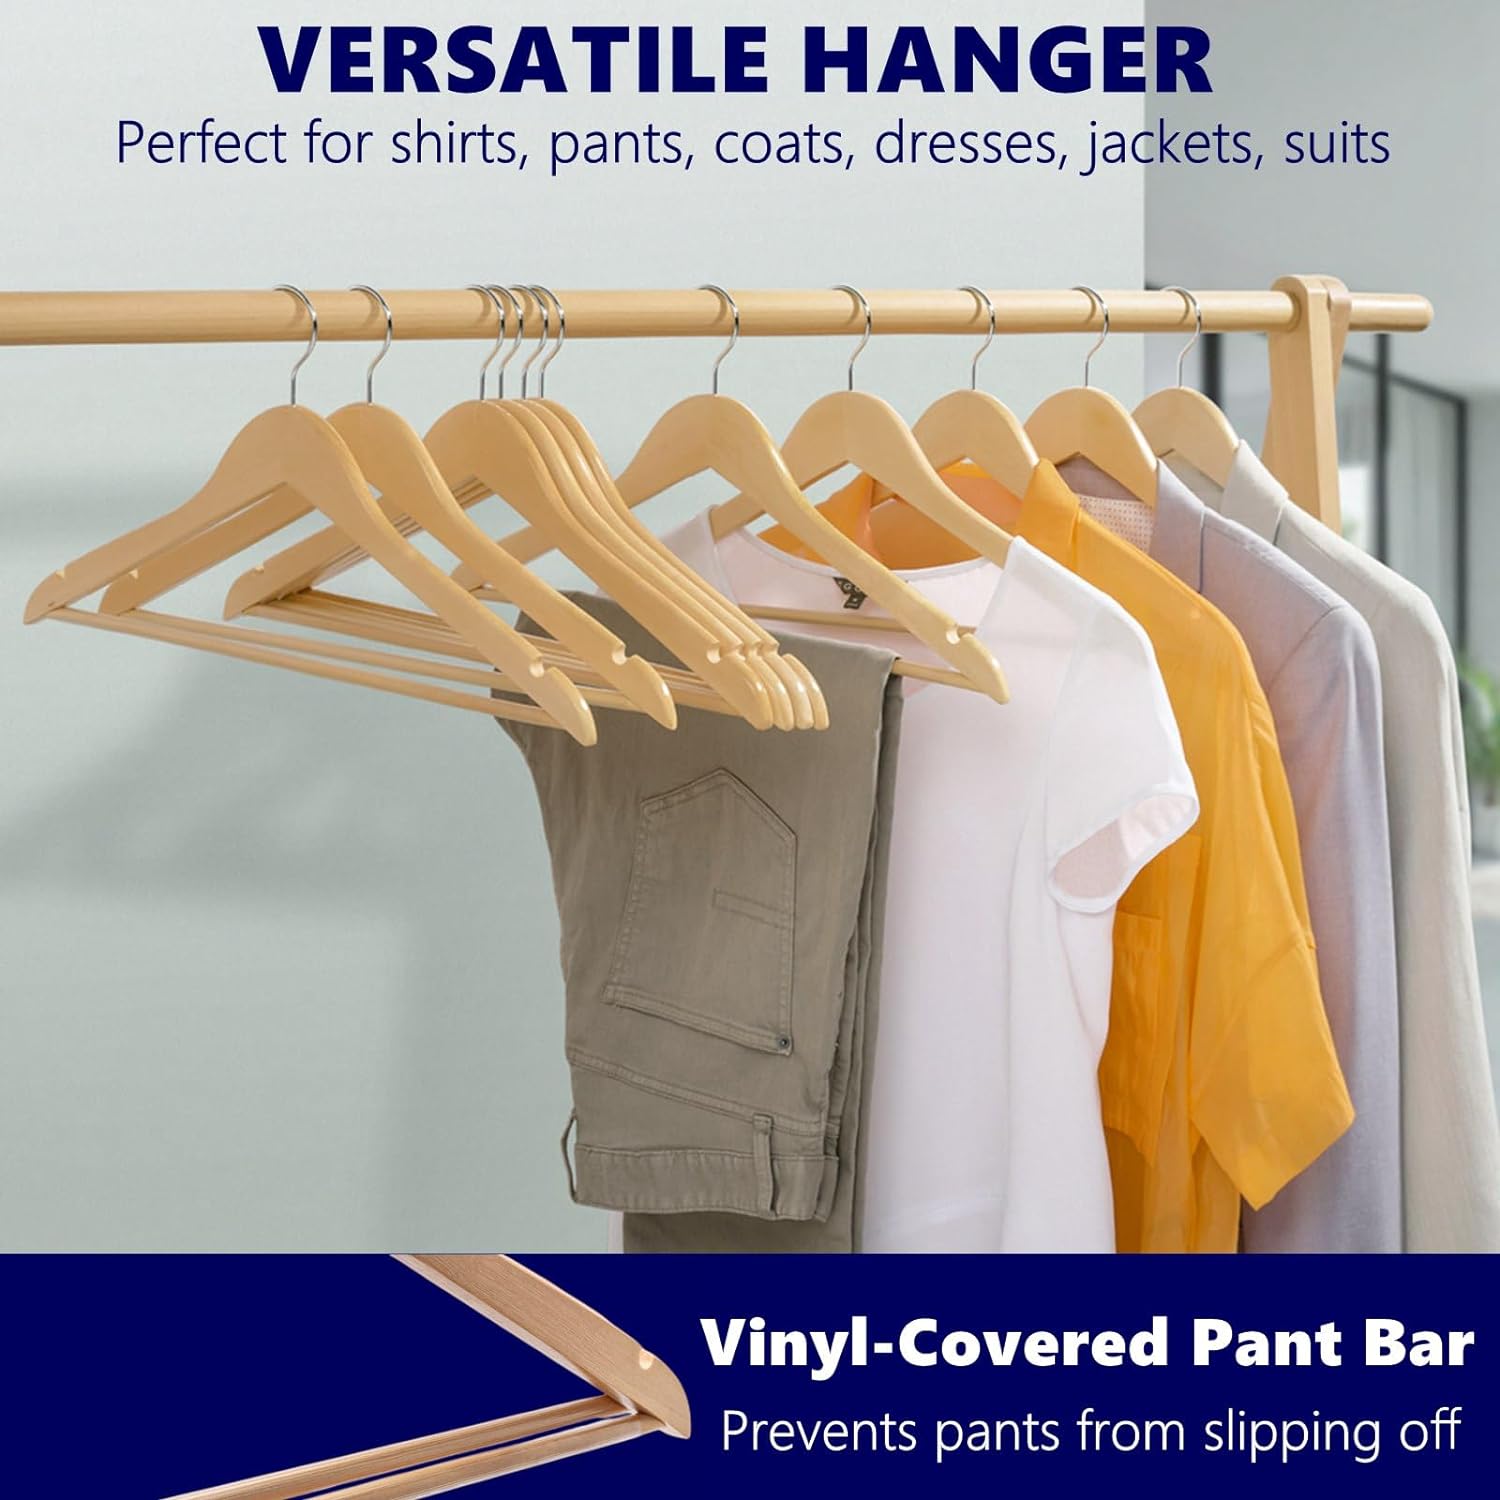 https://bigbigmart.com/wp-content/uploads/2023/12/Amber-Home-Wooden-Coat-Hangers-30-Pack-Natural-Wood-Suit-Hangers-with-Non-Slip-Pant-Bar-Clothes-Hangers-for-Shirts-Jackets-Dress-Pant-Natural-305.jpg